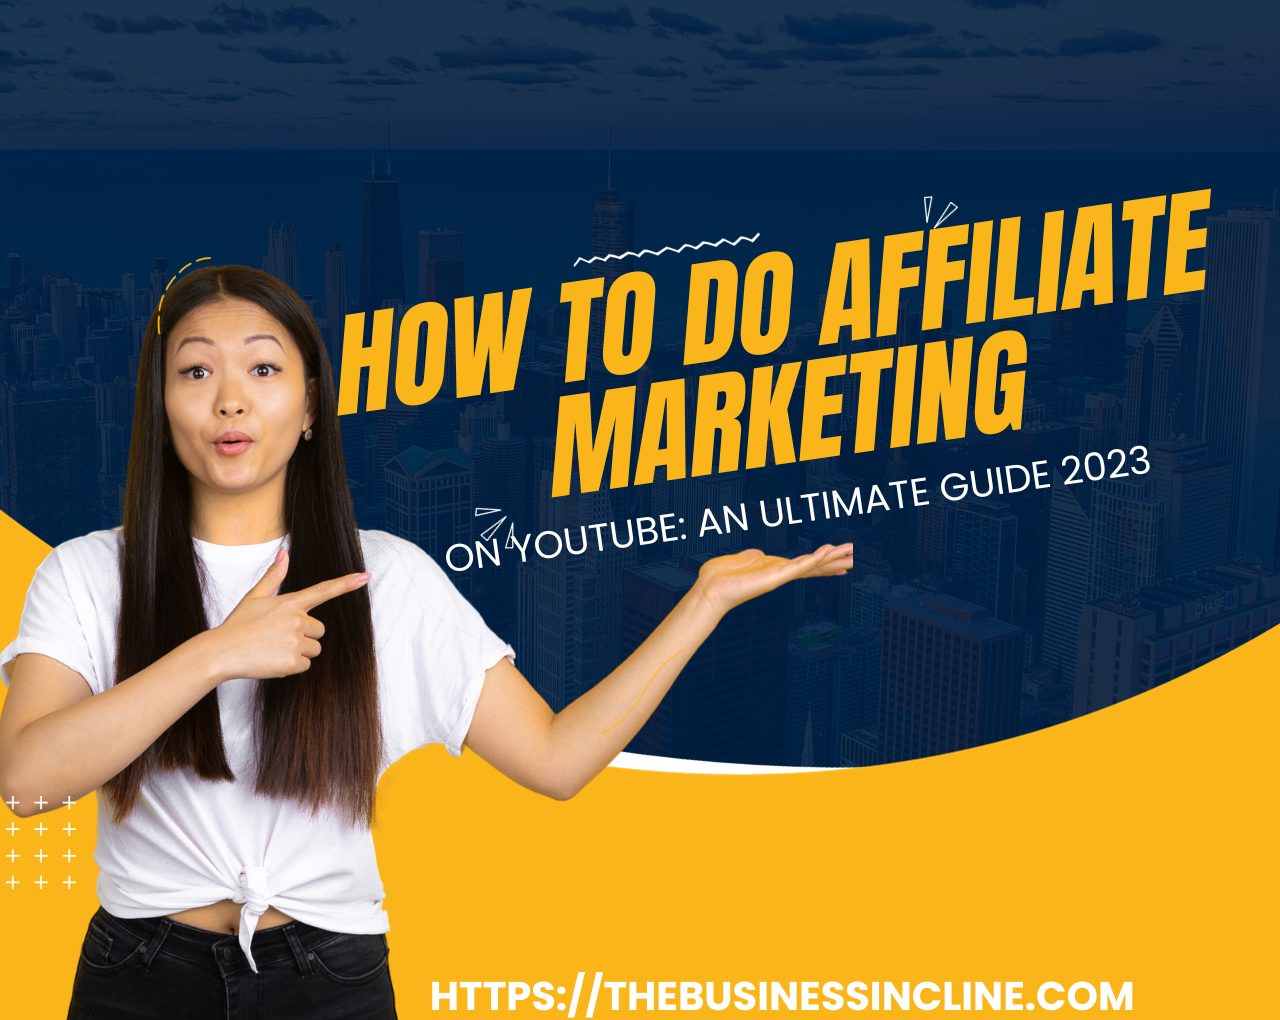 How To Do Affiliate Marketing On YouTube: An Ultimate Guide 2023